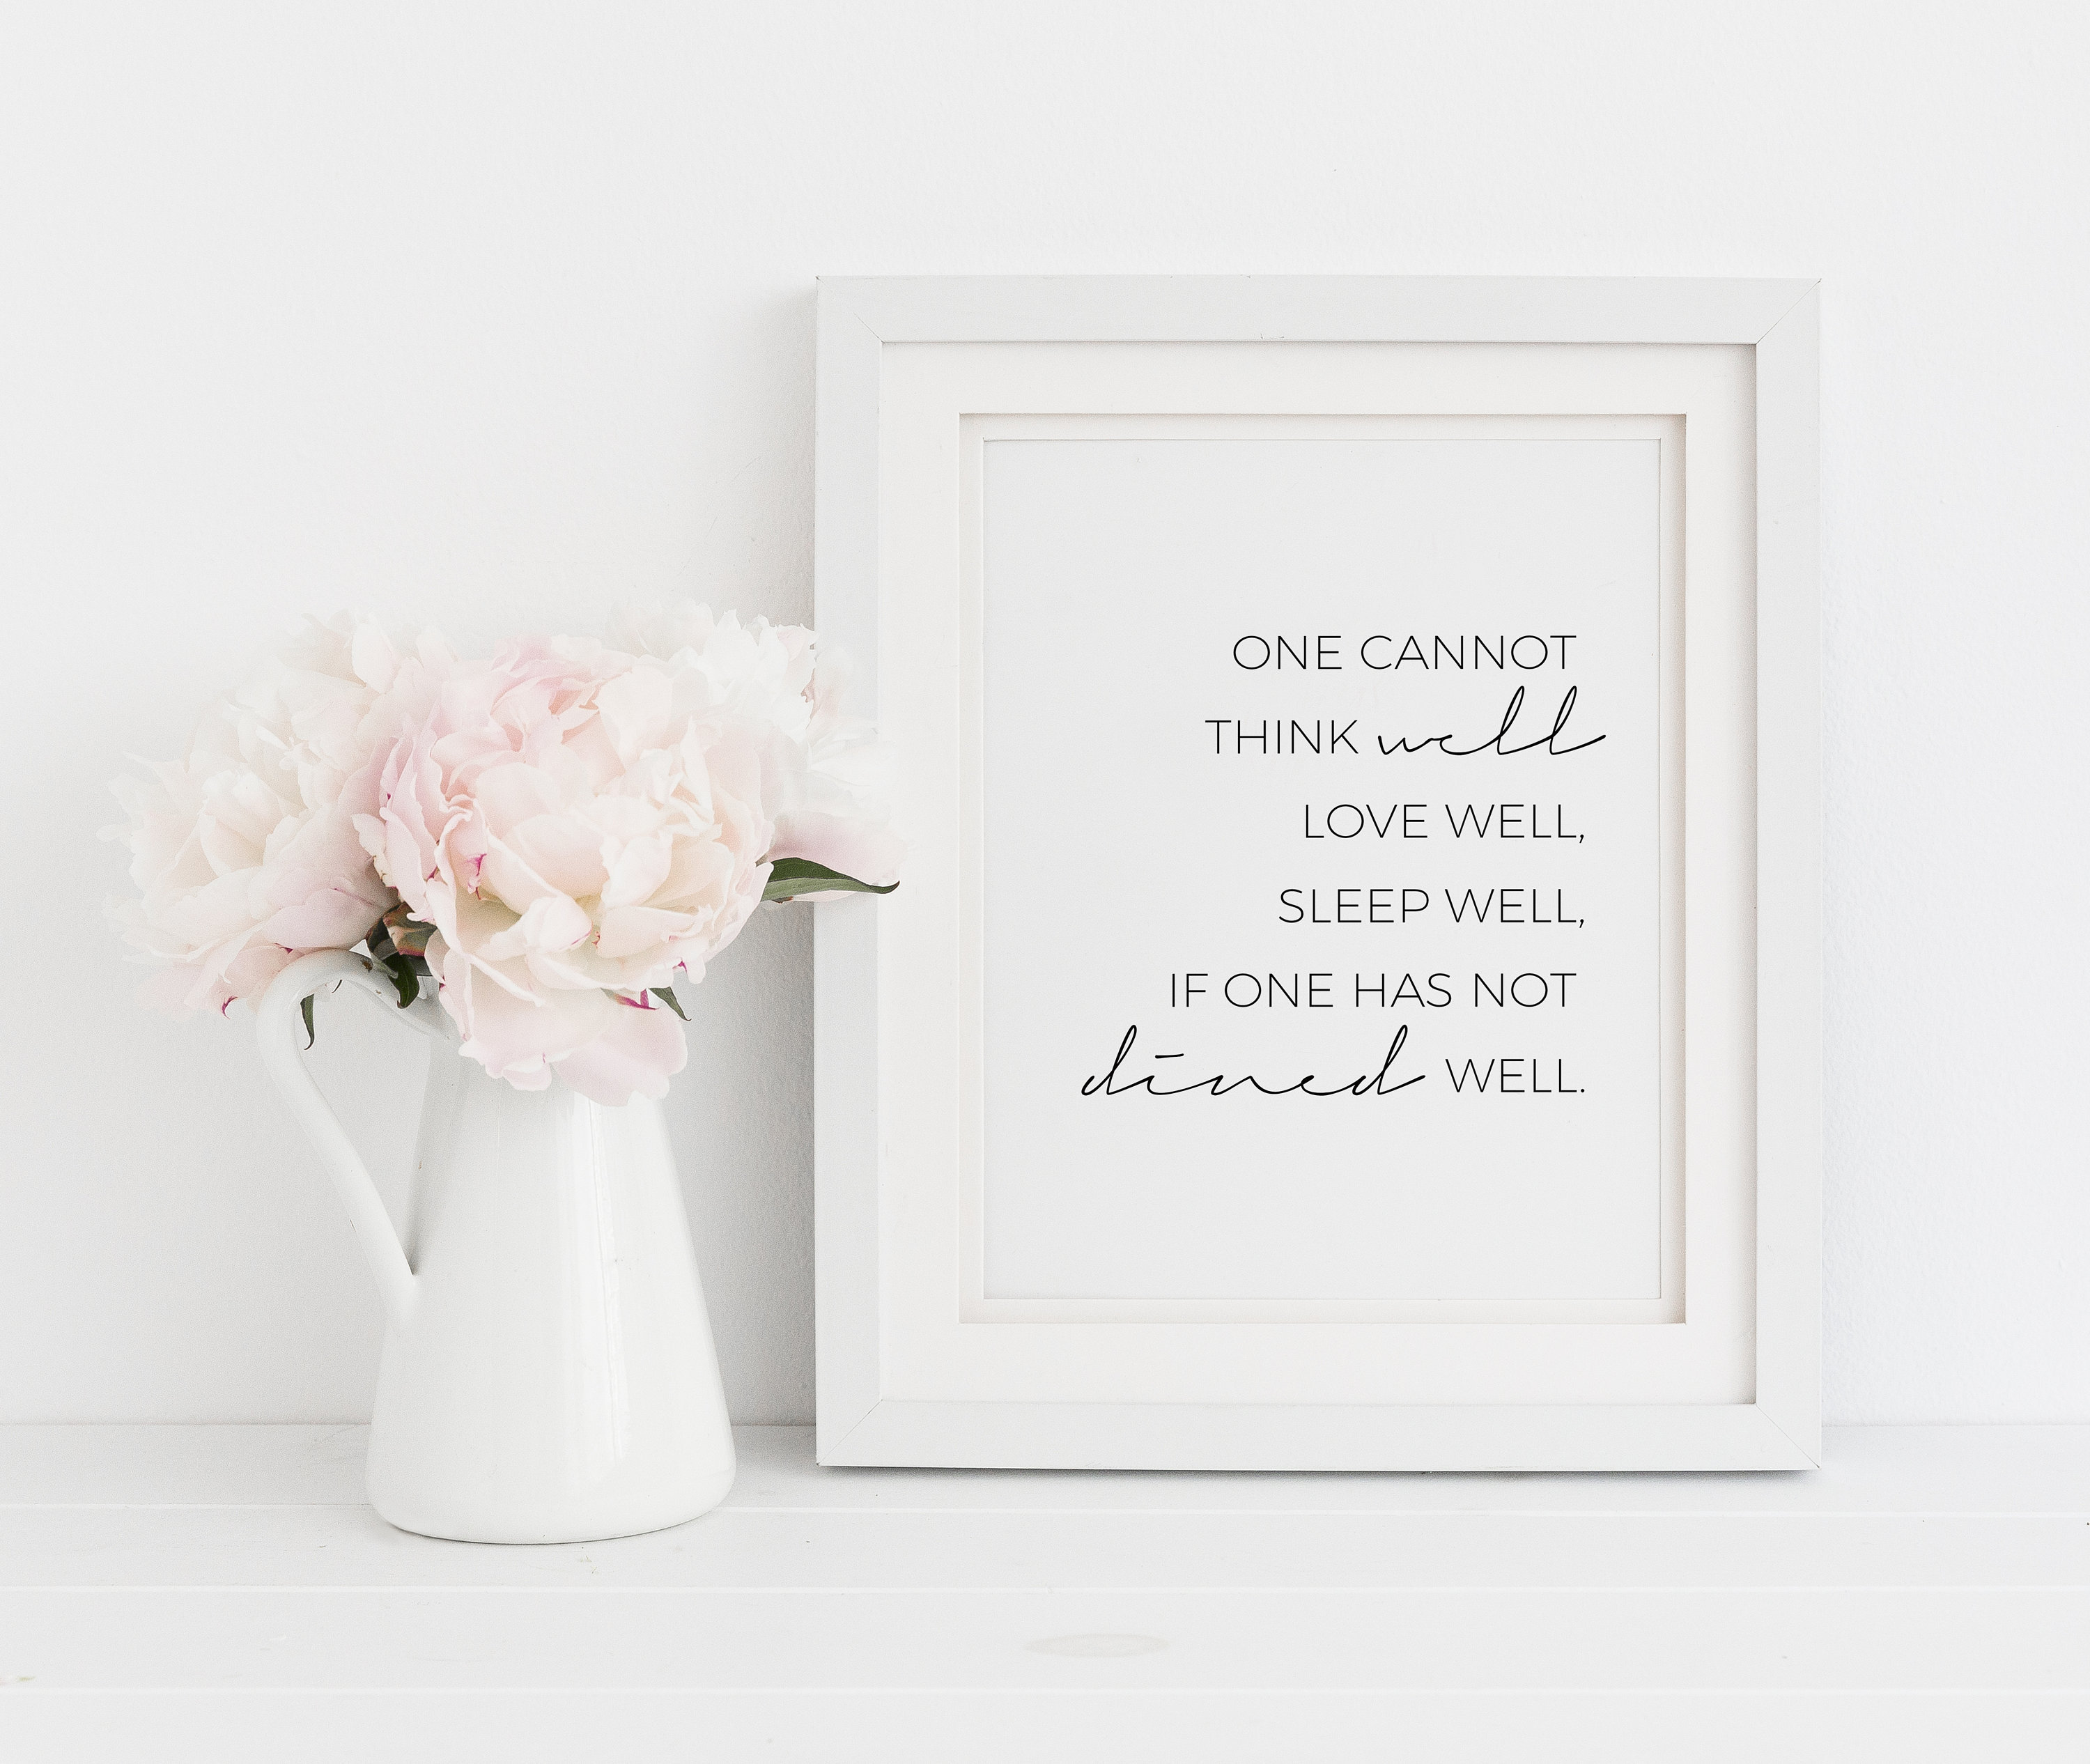 One cannot think well love well sleep well if one has not | Etsy